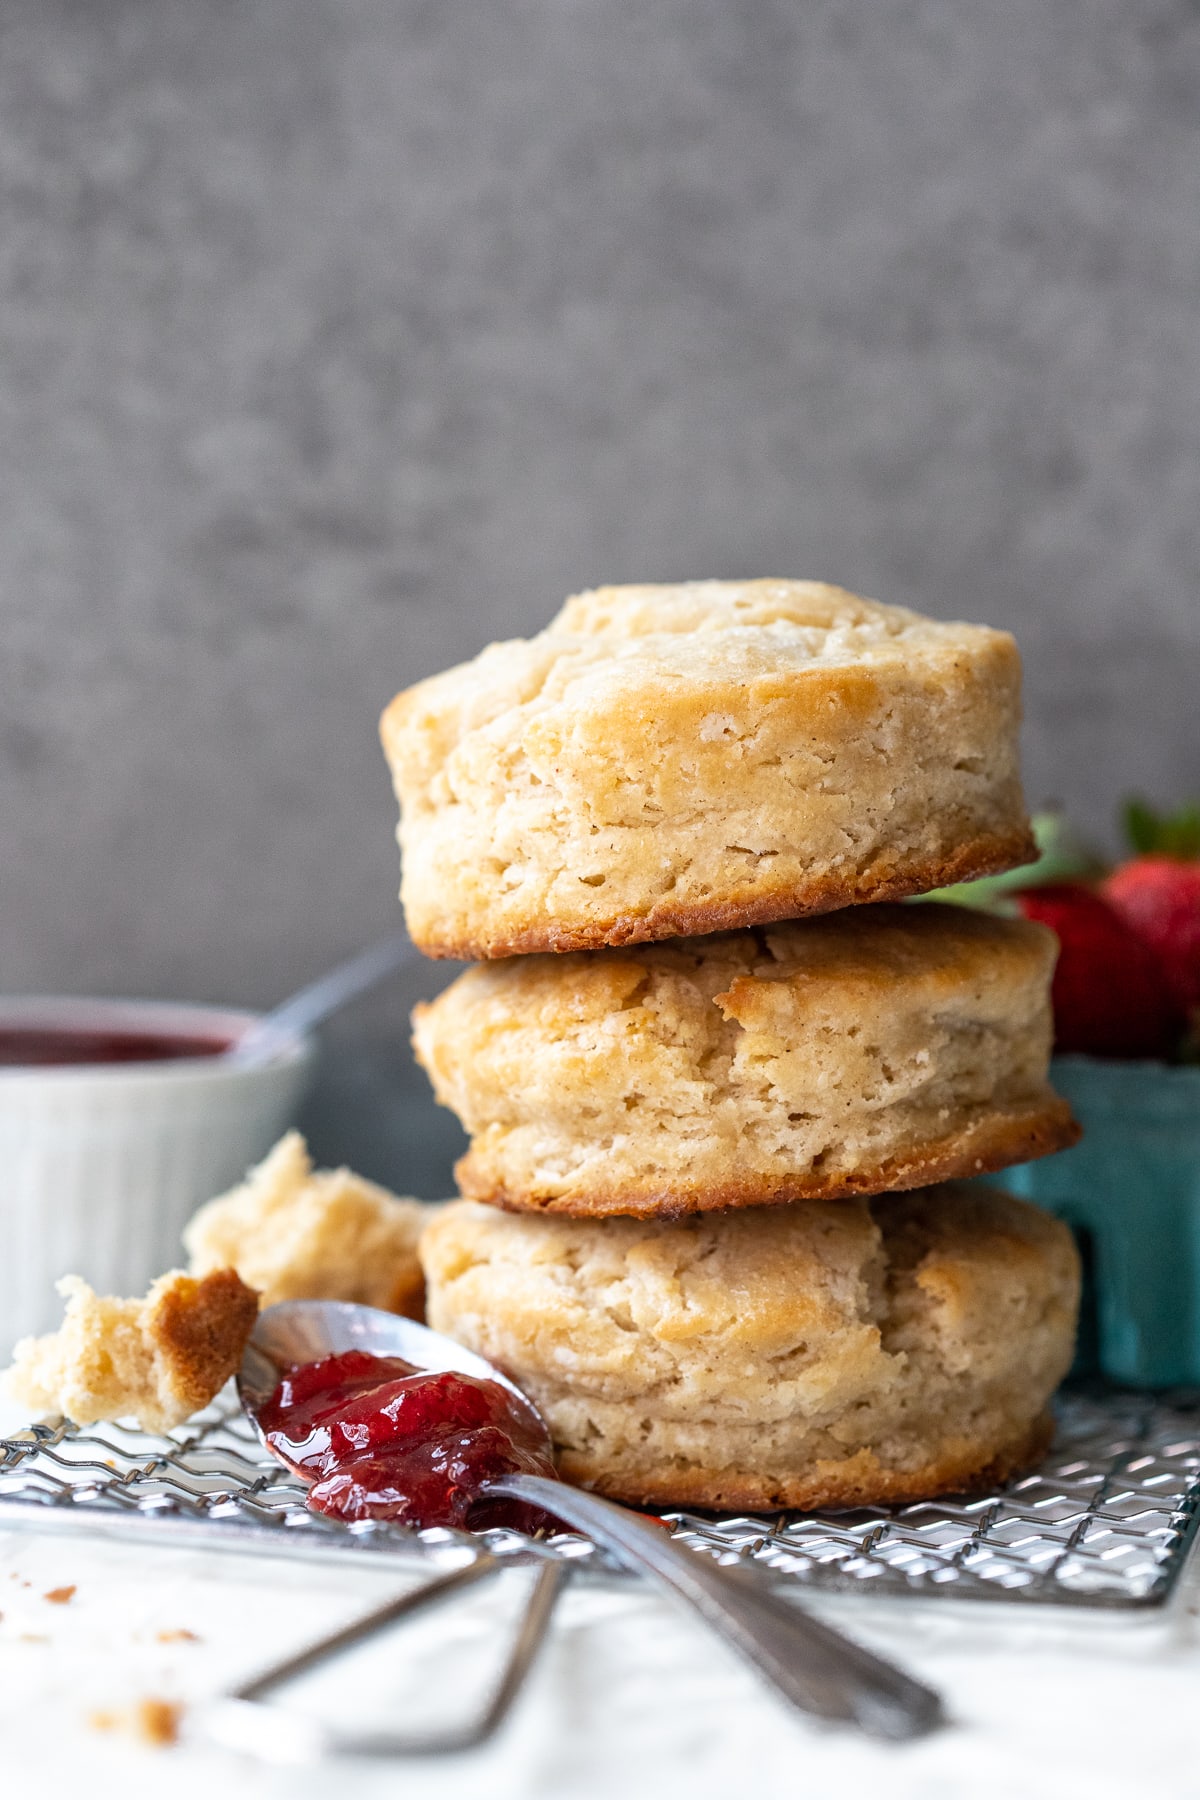 Front-facing view of 3 biscuits stacked atop each other, with a spoonful of jam in for foreground and a basket of strawberries in the background.